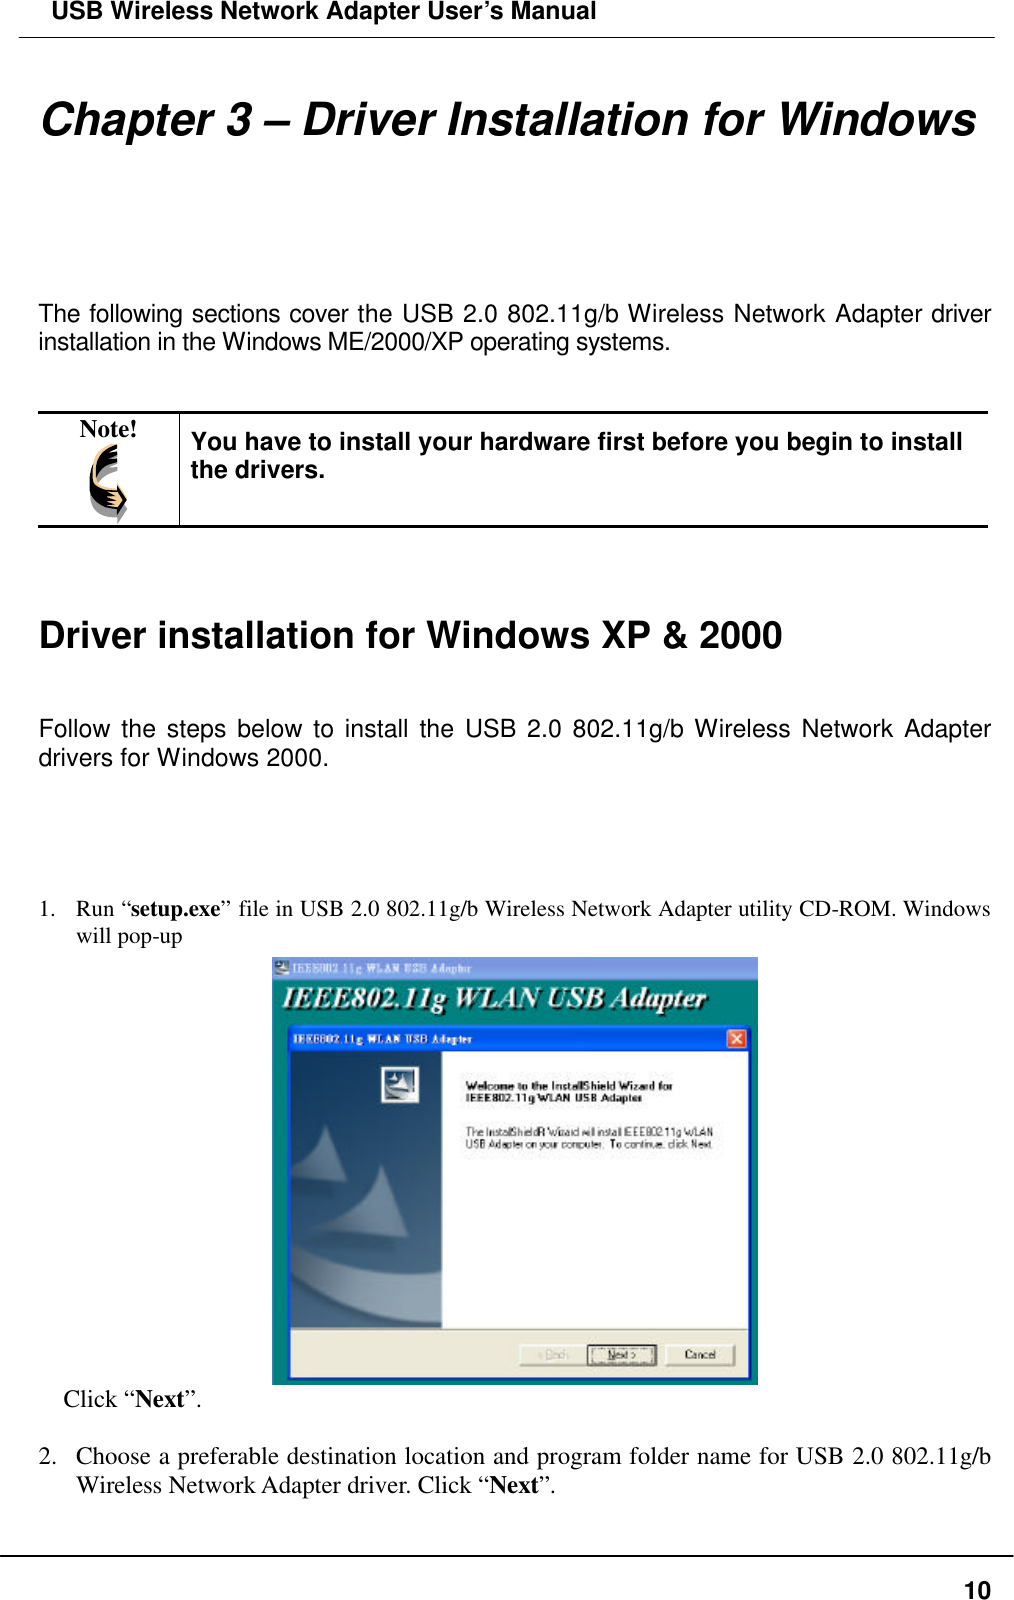  USB Wireless Network Adapter User’s Manual  10Chapter 3 – Driver Installation for Windows  The following sections cover the USB 2.0 802.11g/b Wireless Network Adapter driver installation in the Windows ME/2000/XP operating systems.   Note!  You have to install your hardware first before you begin to install the drivers.    Driver installation for Windows XP &amp; 2000   Follow the steps below to install the USB 2.0 802.11g/b Wireless Network Adapter drivers for Windows 2000.     1.  Run “setup.exe” file in USB 2.0 802.11g/b Wireless Network Adapter utility CD-ROM. Windows will pop-up   Click “Next”.  2.  Choose a preferable destination location and program folder name for USB 2.0 802.11g/b Wireless Network Adapter driver. Click “Next”. 